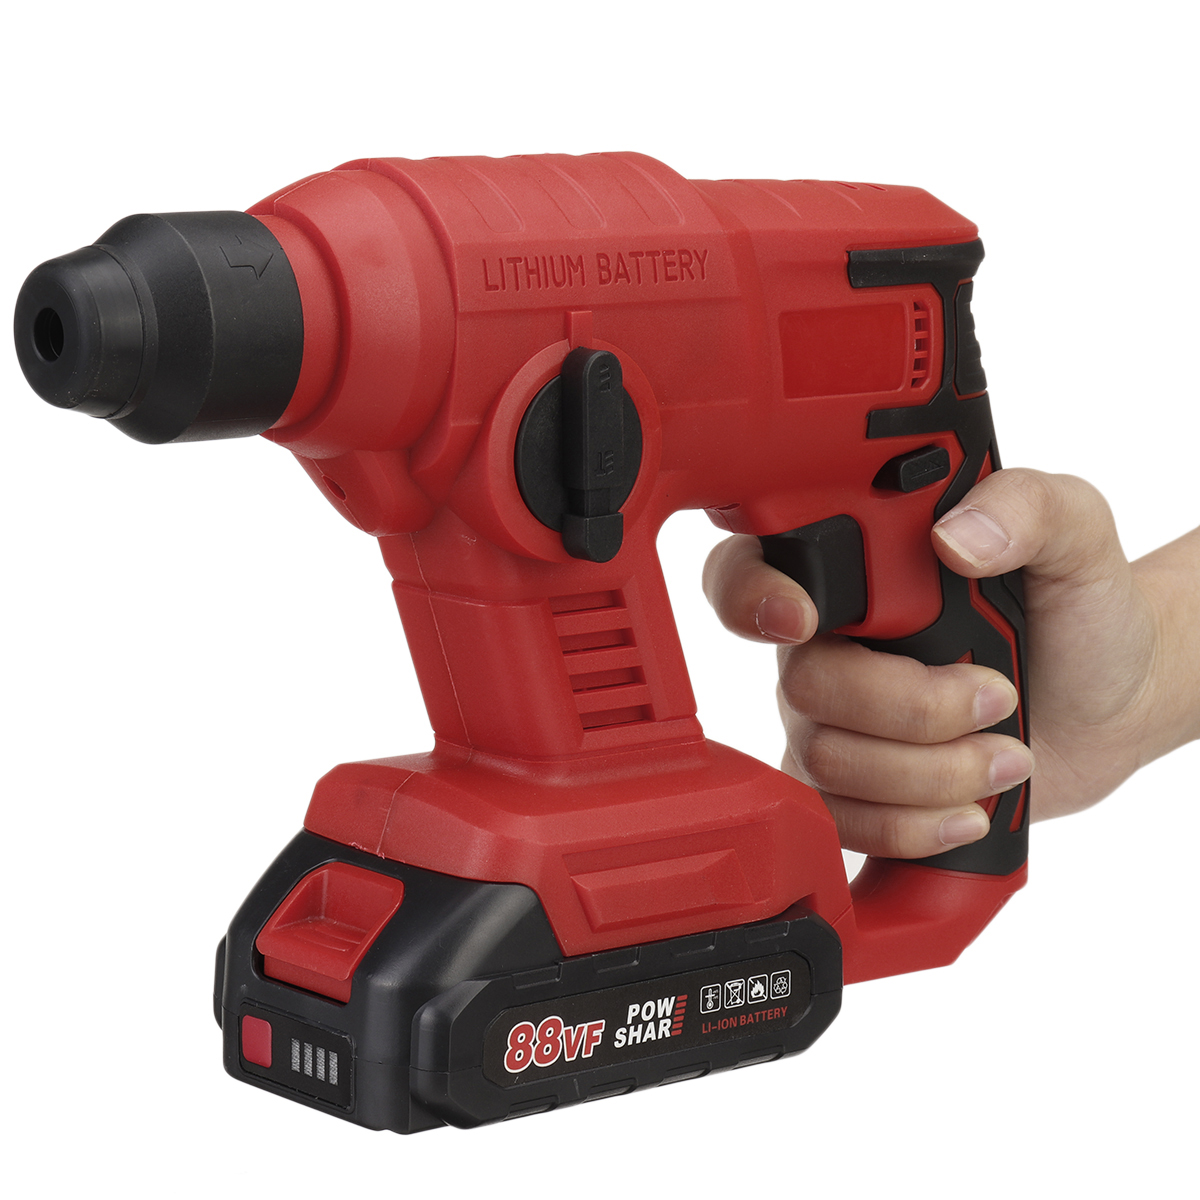 88VF-2000W-Rechargeable-Electric-Hammer-Lithium-Impact-Electric-Hammer-Impact-Drill-With-6mm-Drill-B-1896291-6